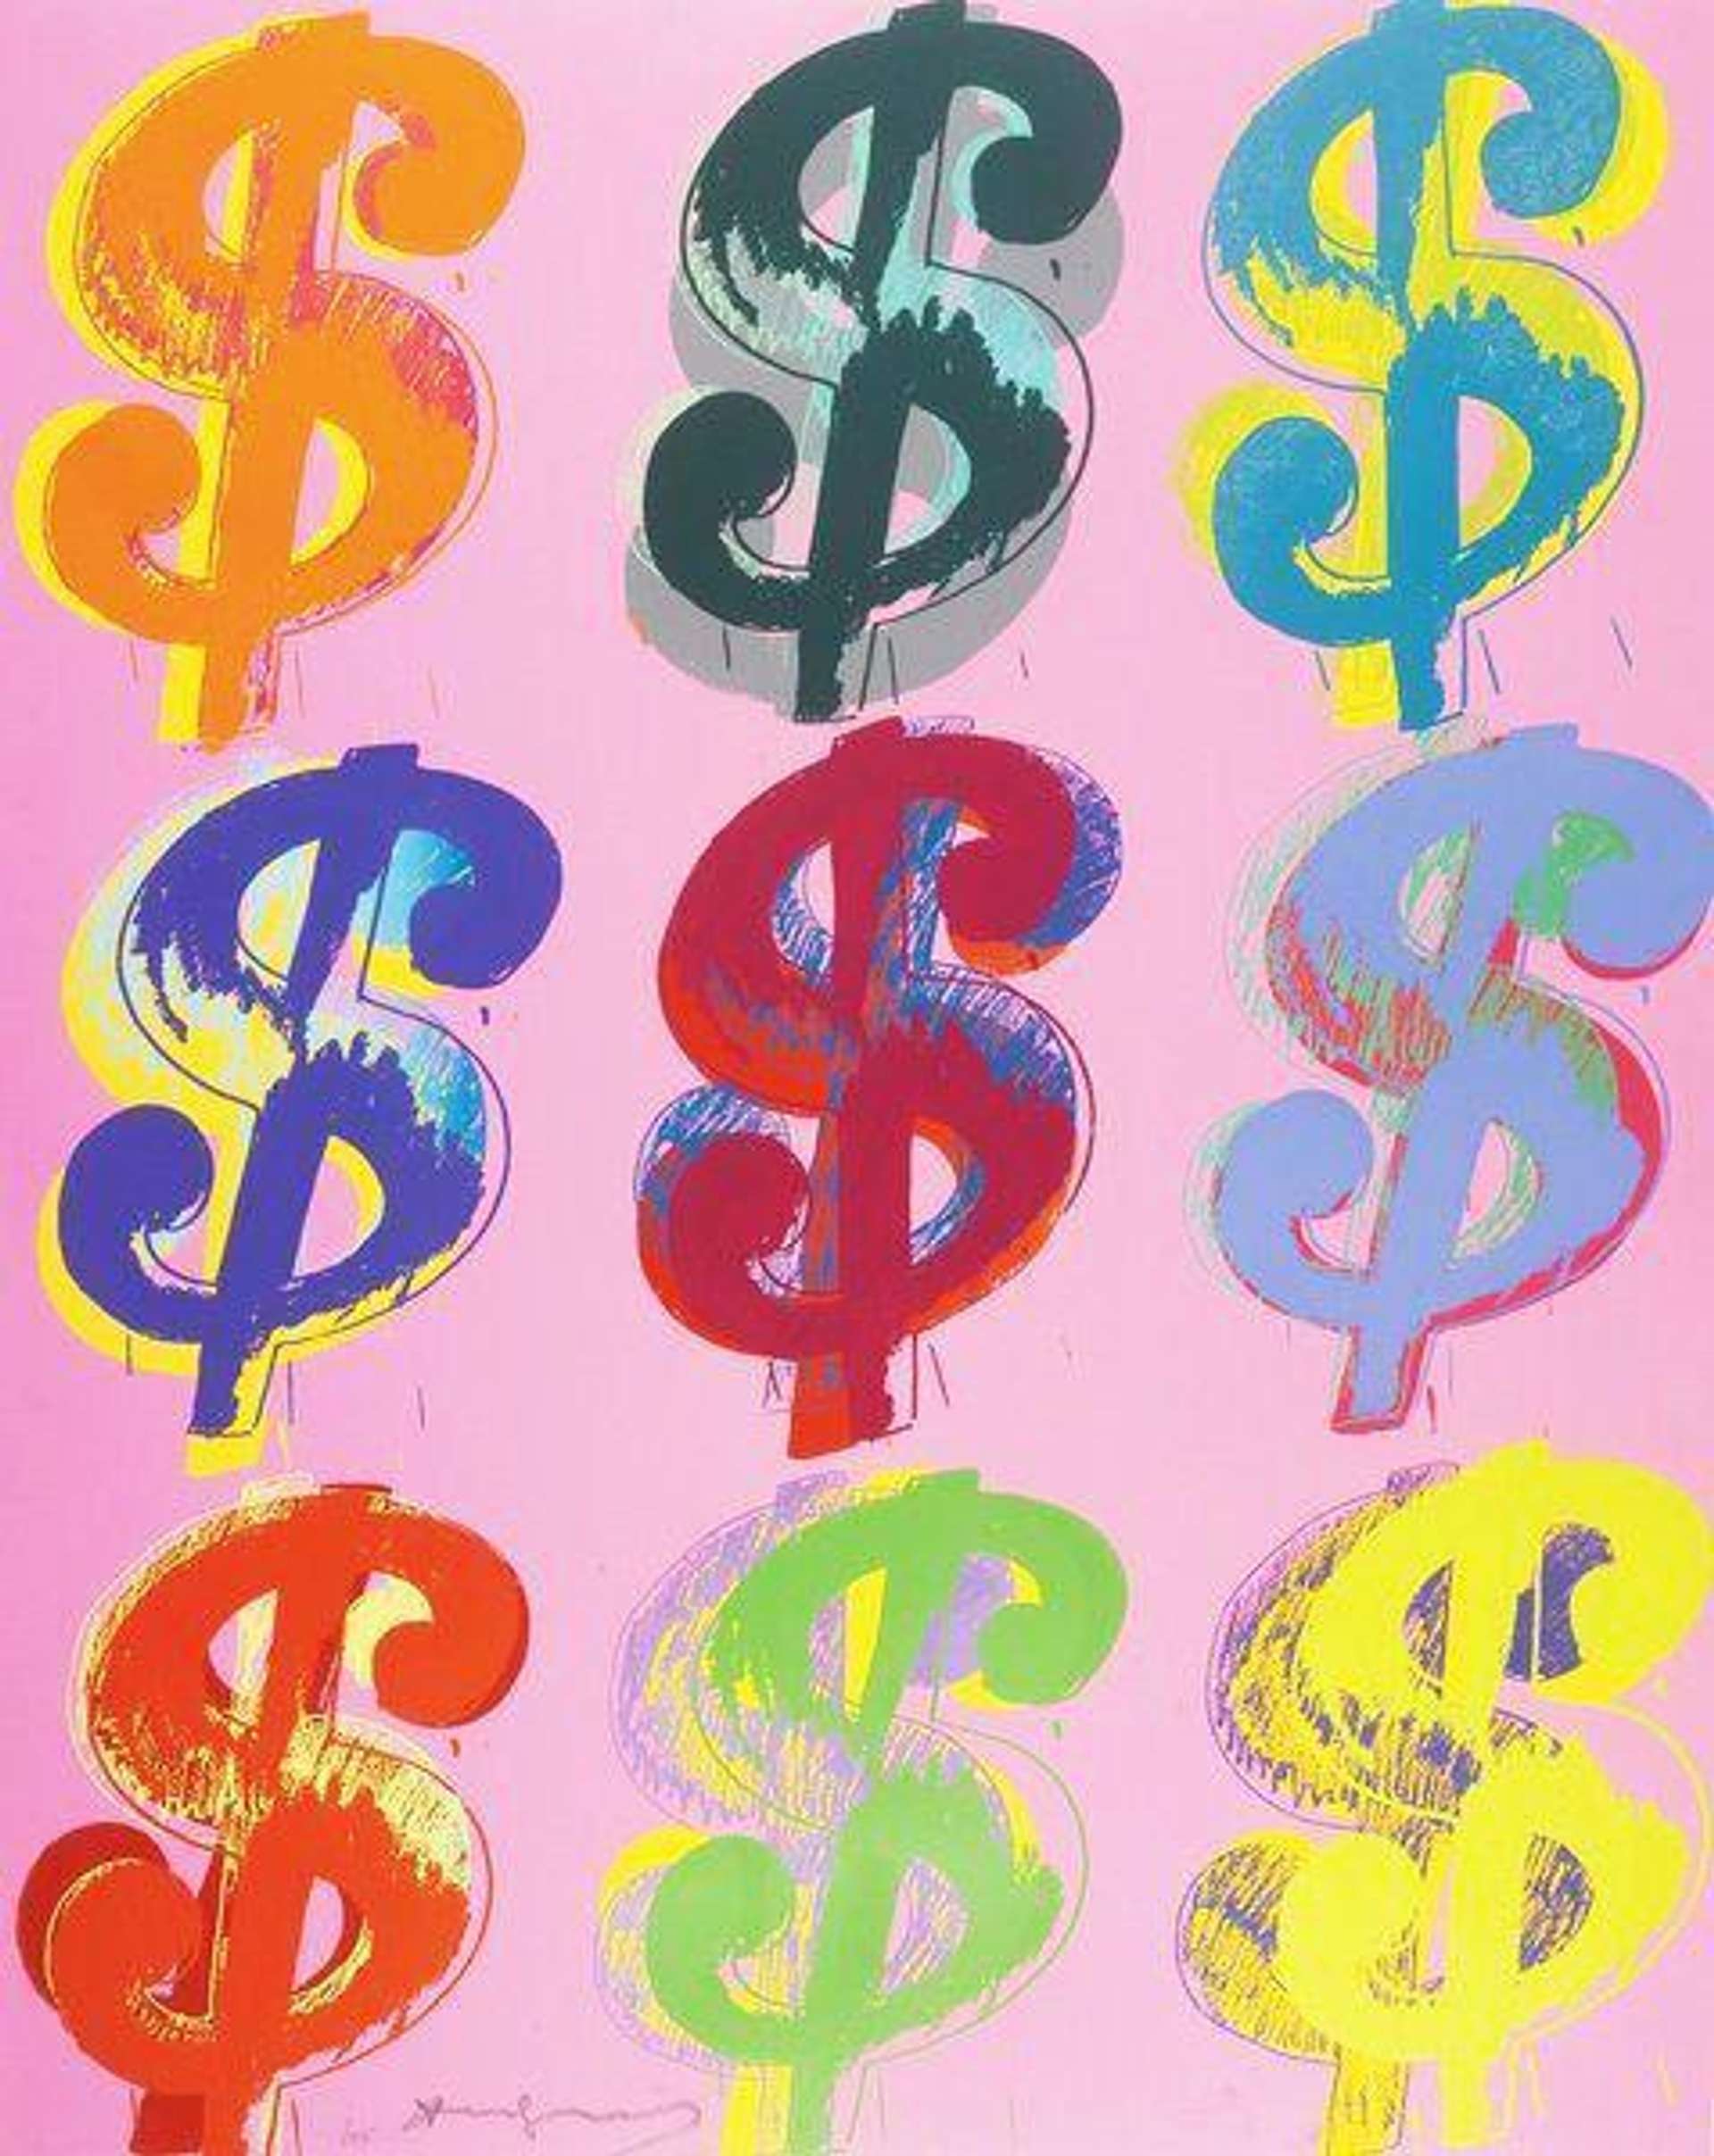 How to Diversify Your Portfolio: Art as an Alternative Investment